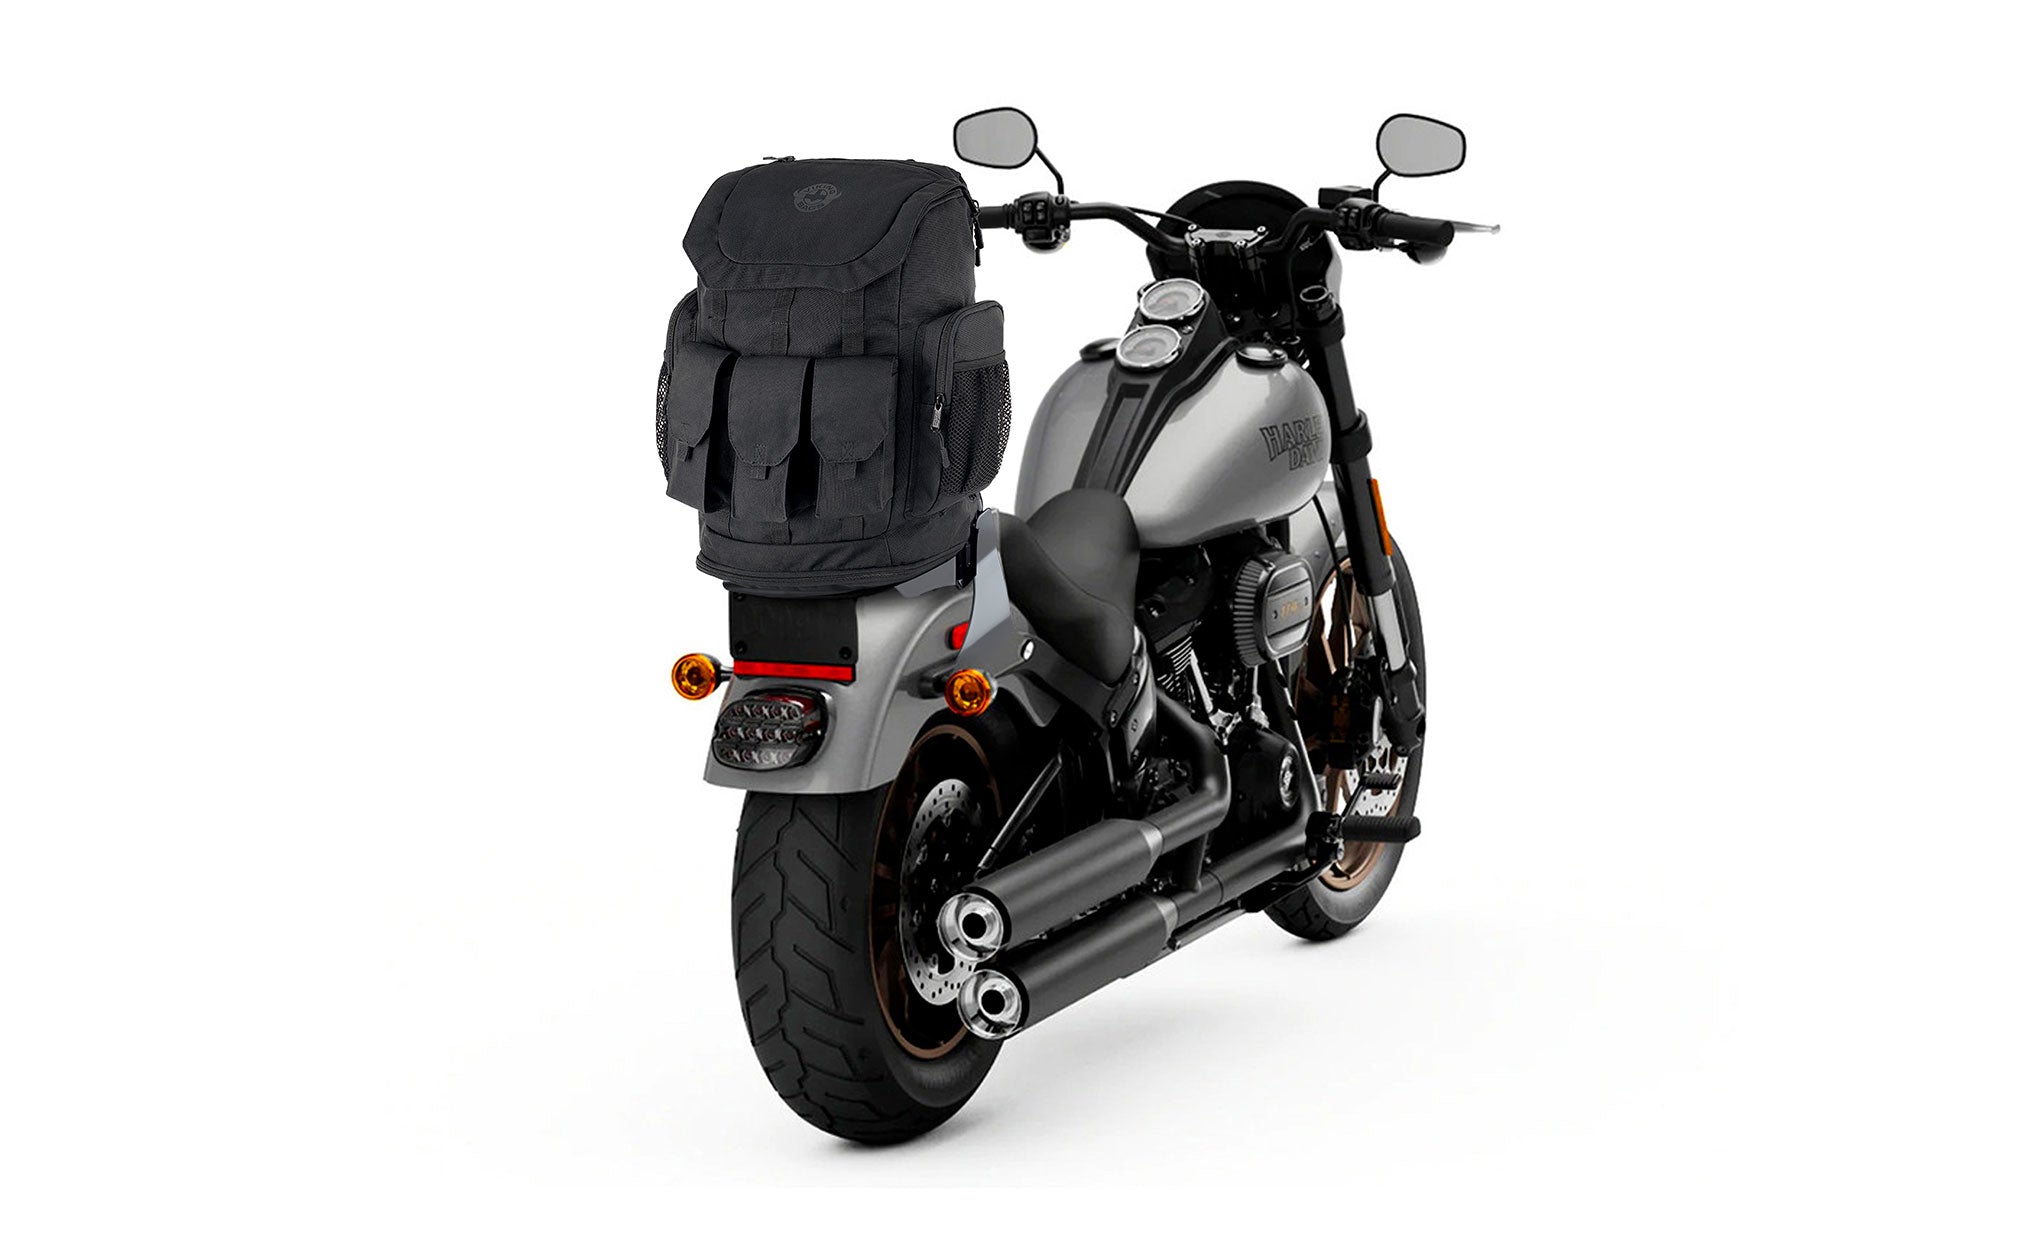 Viking Trident XL Victory Motorcycle Sissy Bar Backpack Bag on Bike View @expand